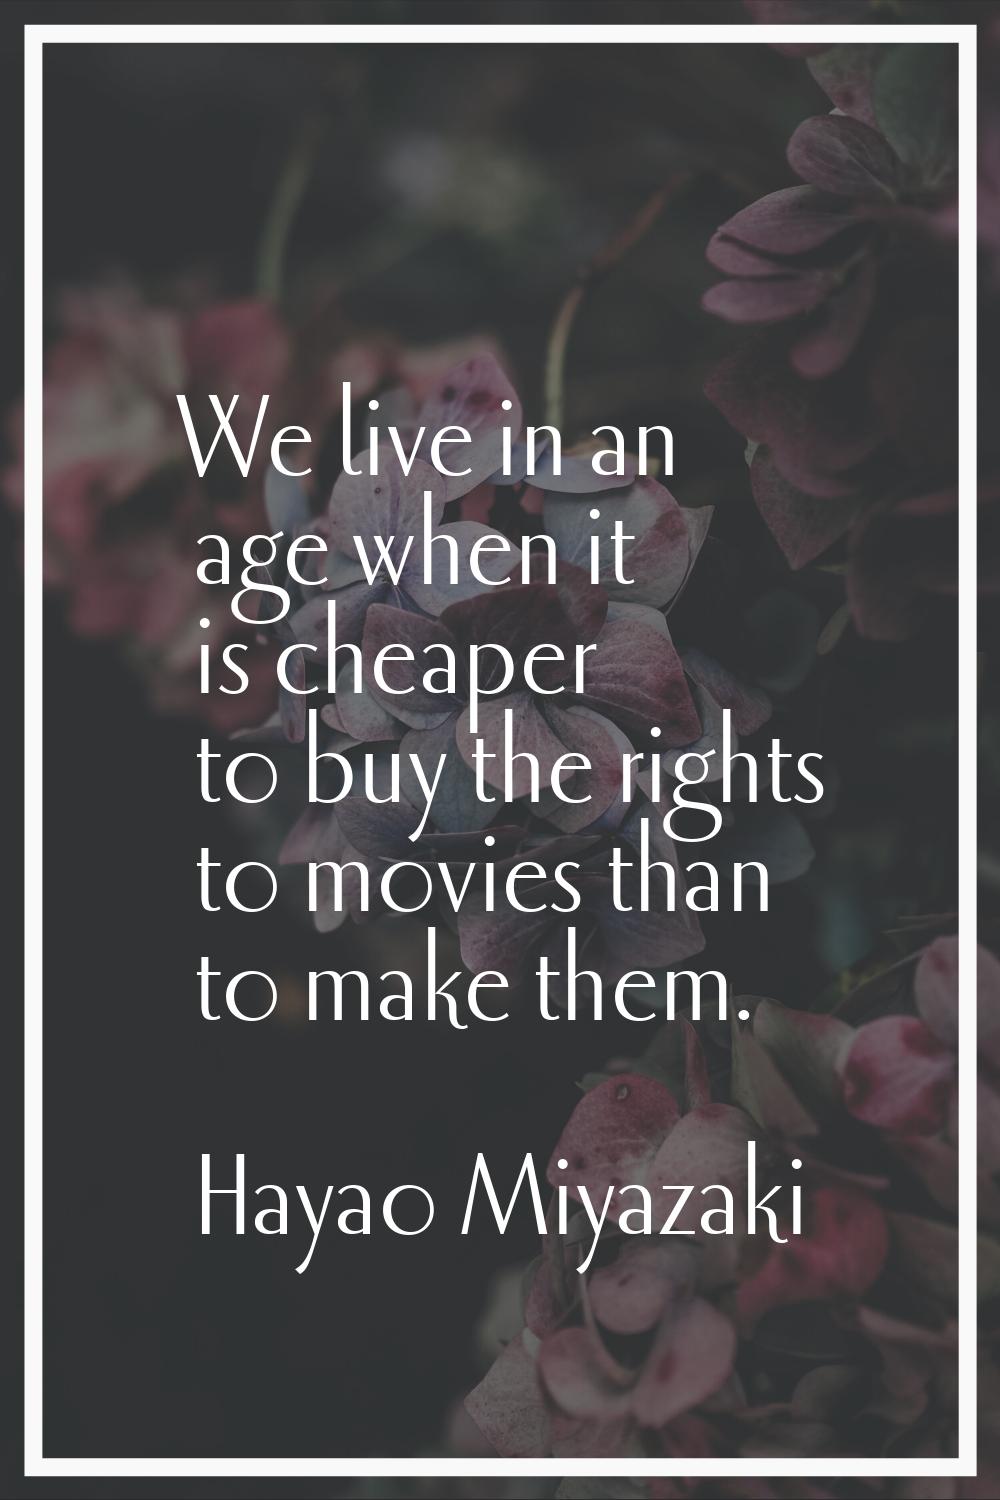 We live in an age when it is cheaper to buy the rights to movies than to make them.